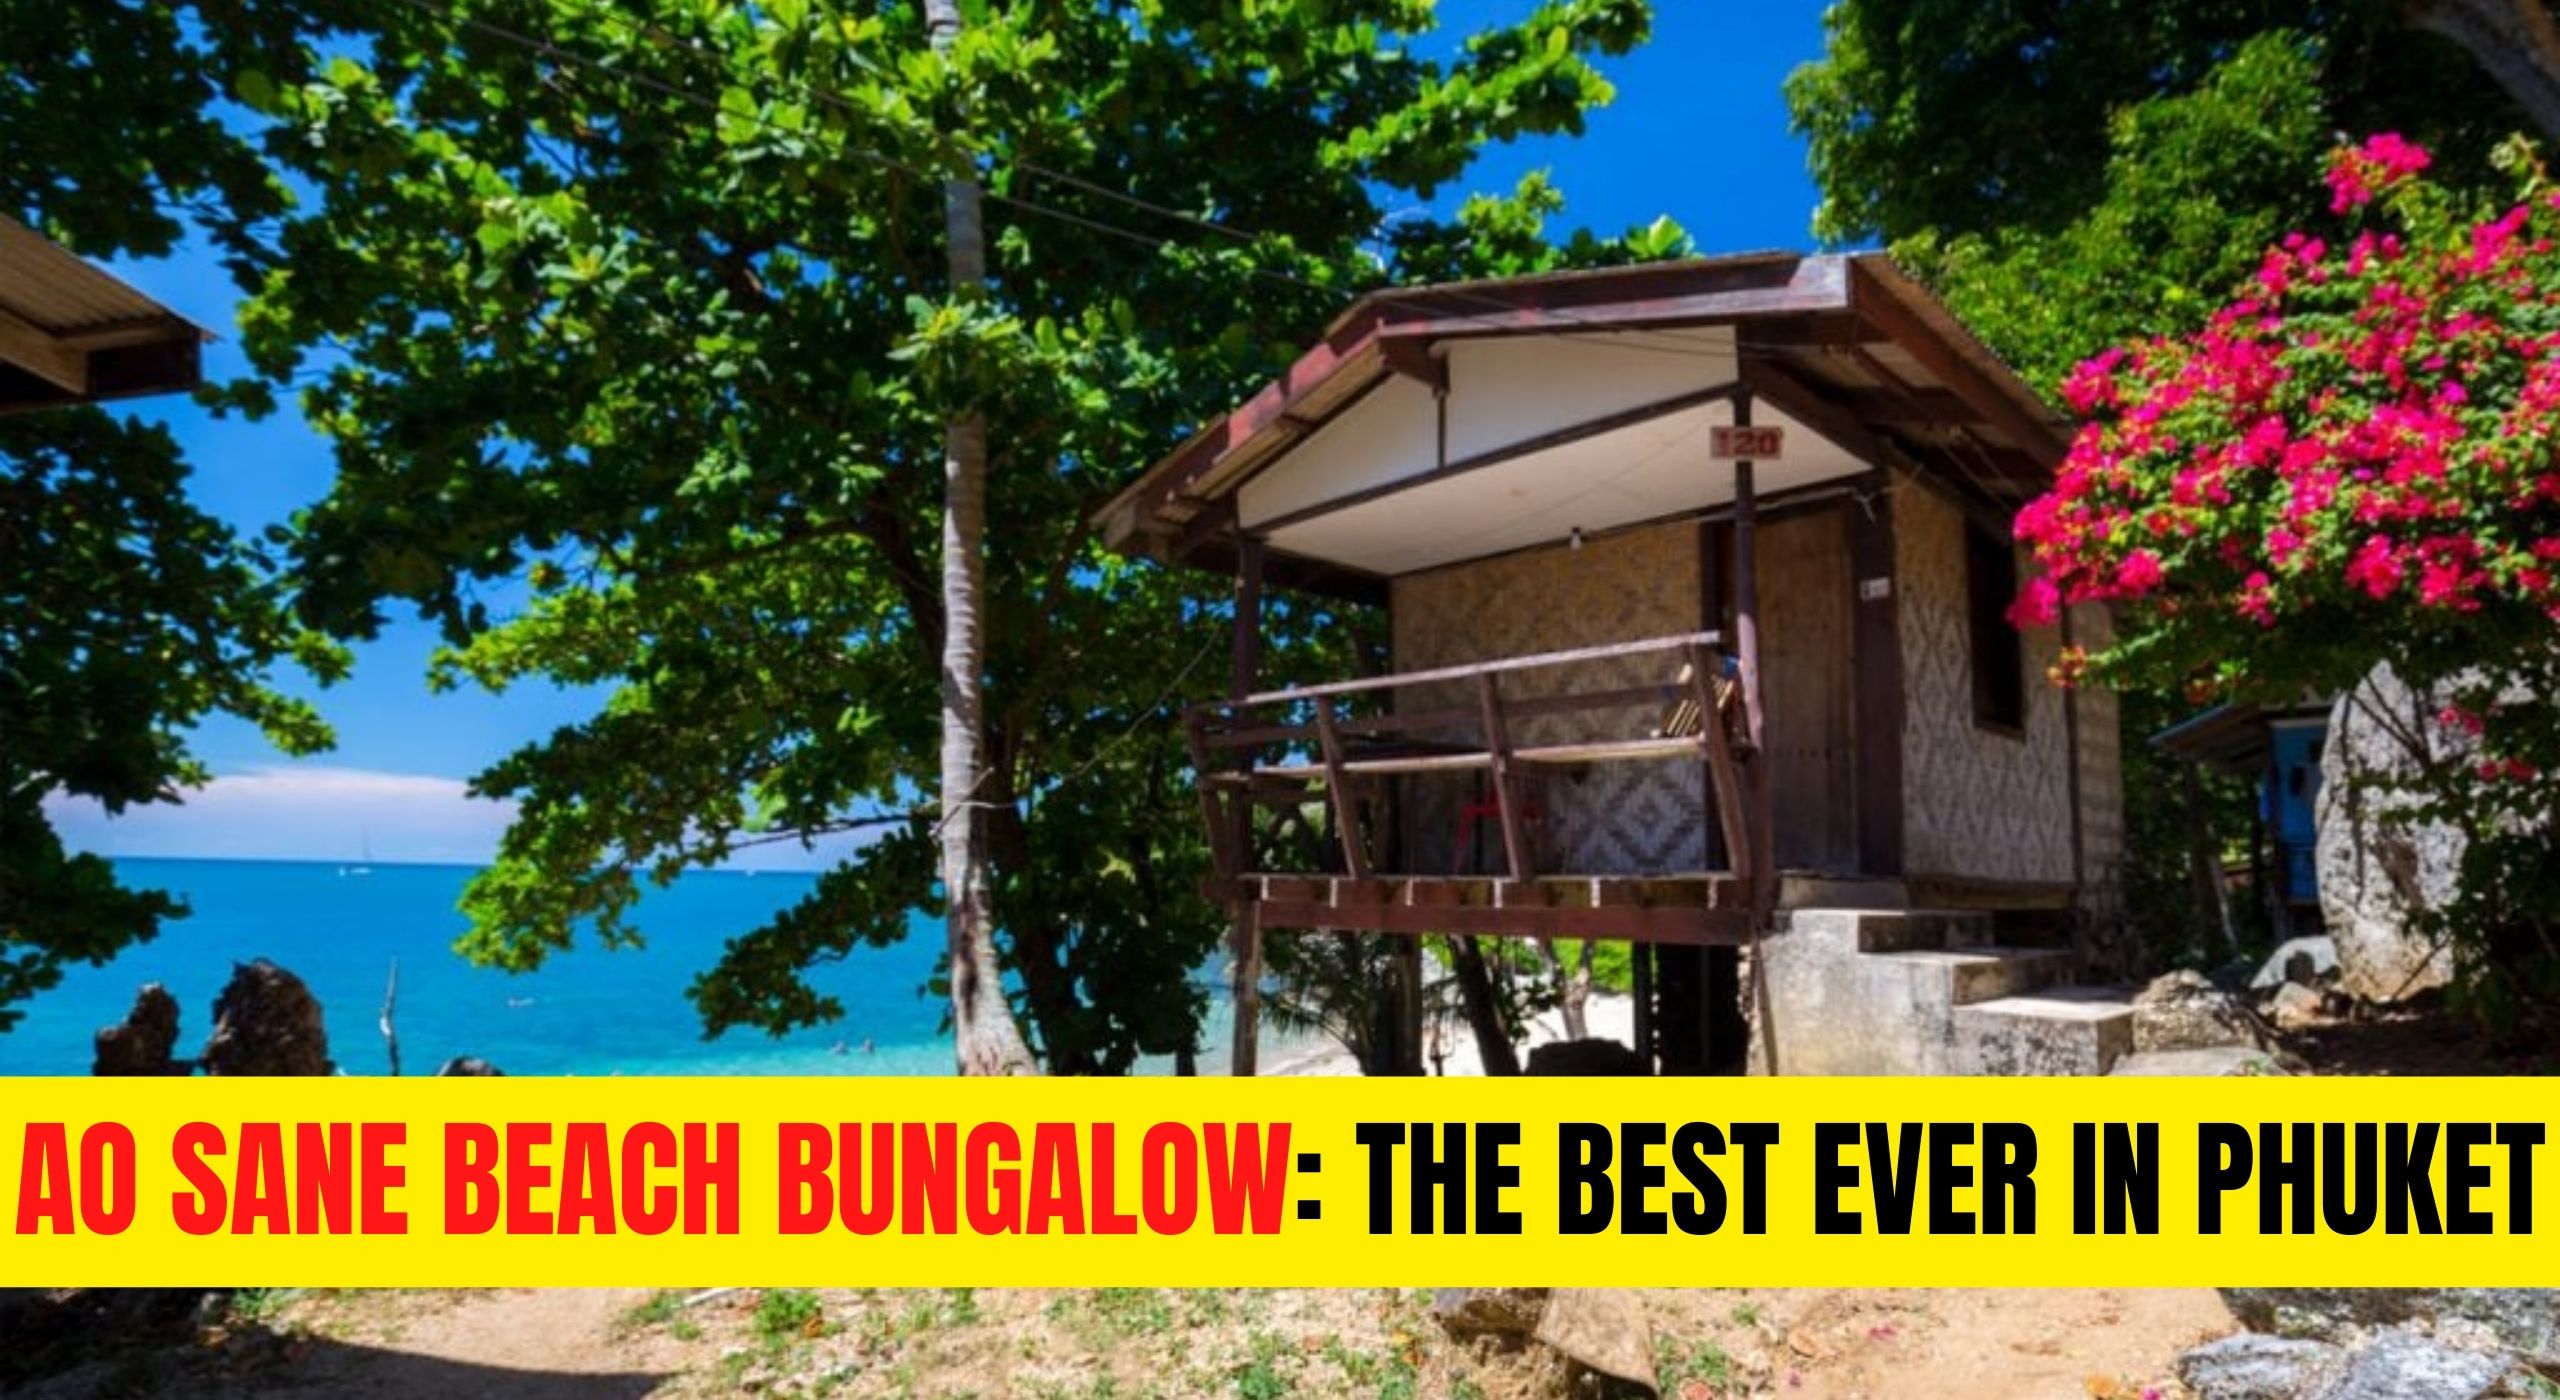 Ao Sane Beach Bungalow: The Best Ever In Phuket